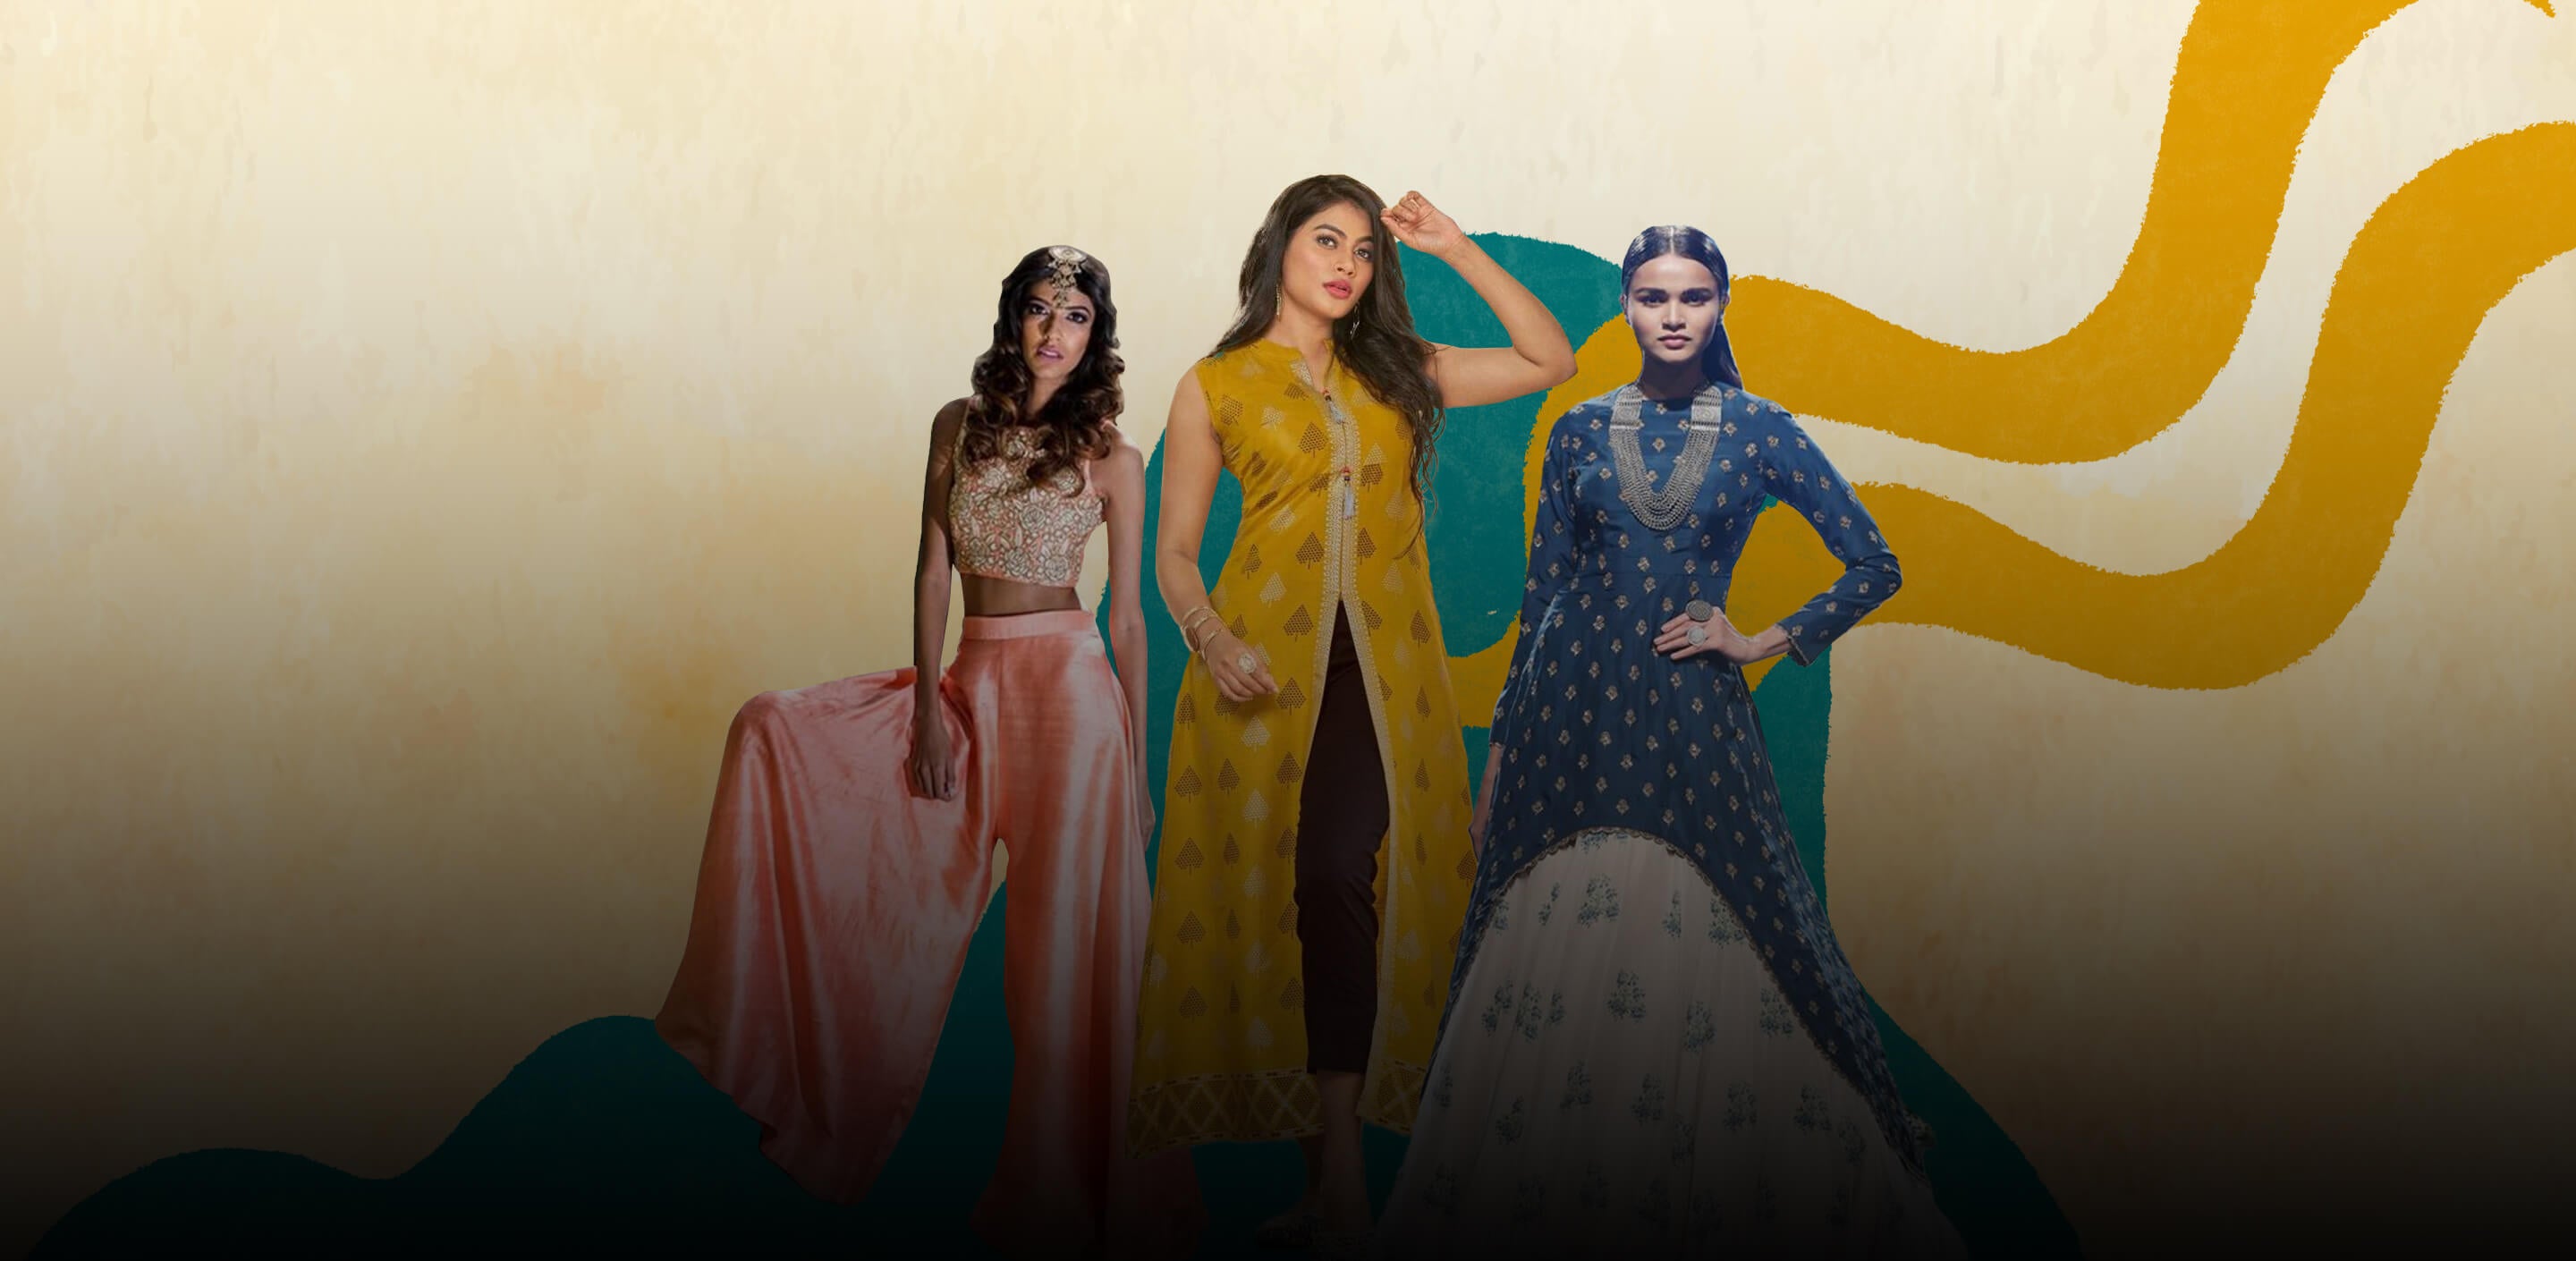 This Year Celebrate Your Diwali With These Attires